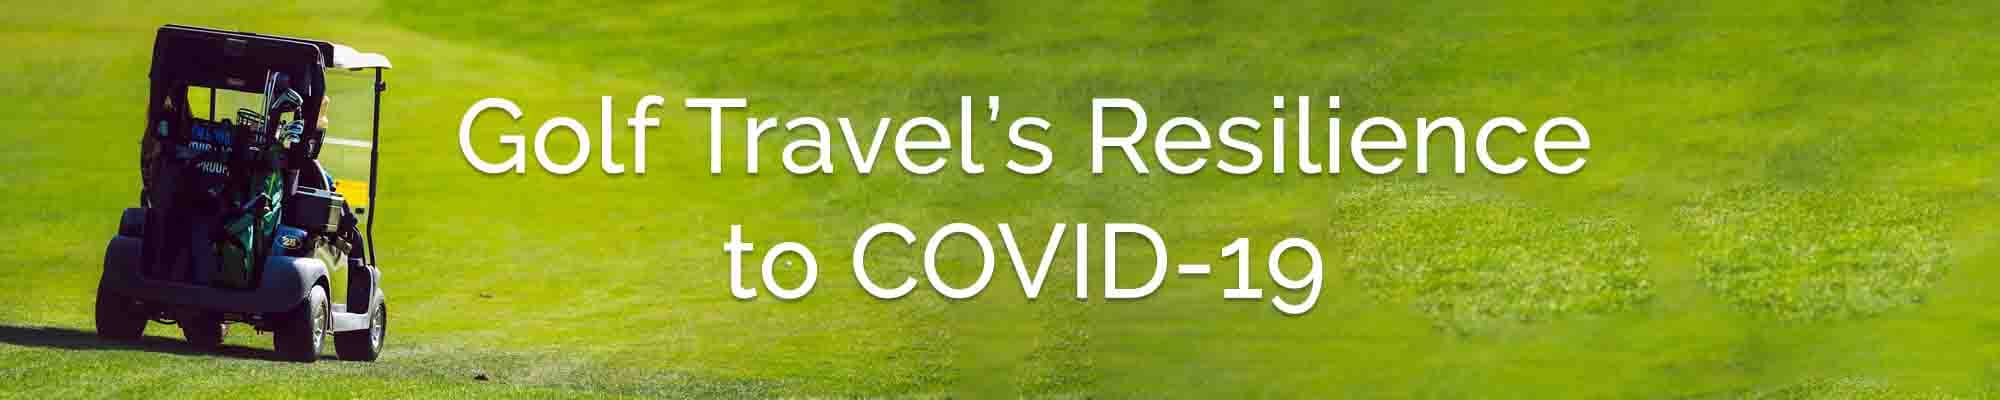 golf tourism during COVID-19